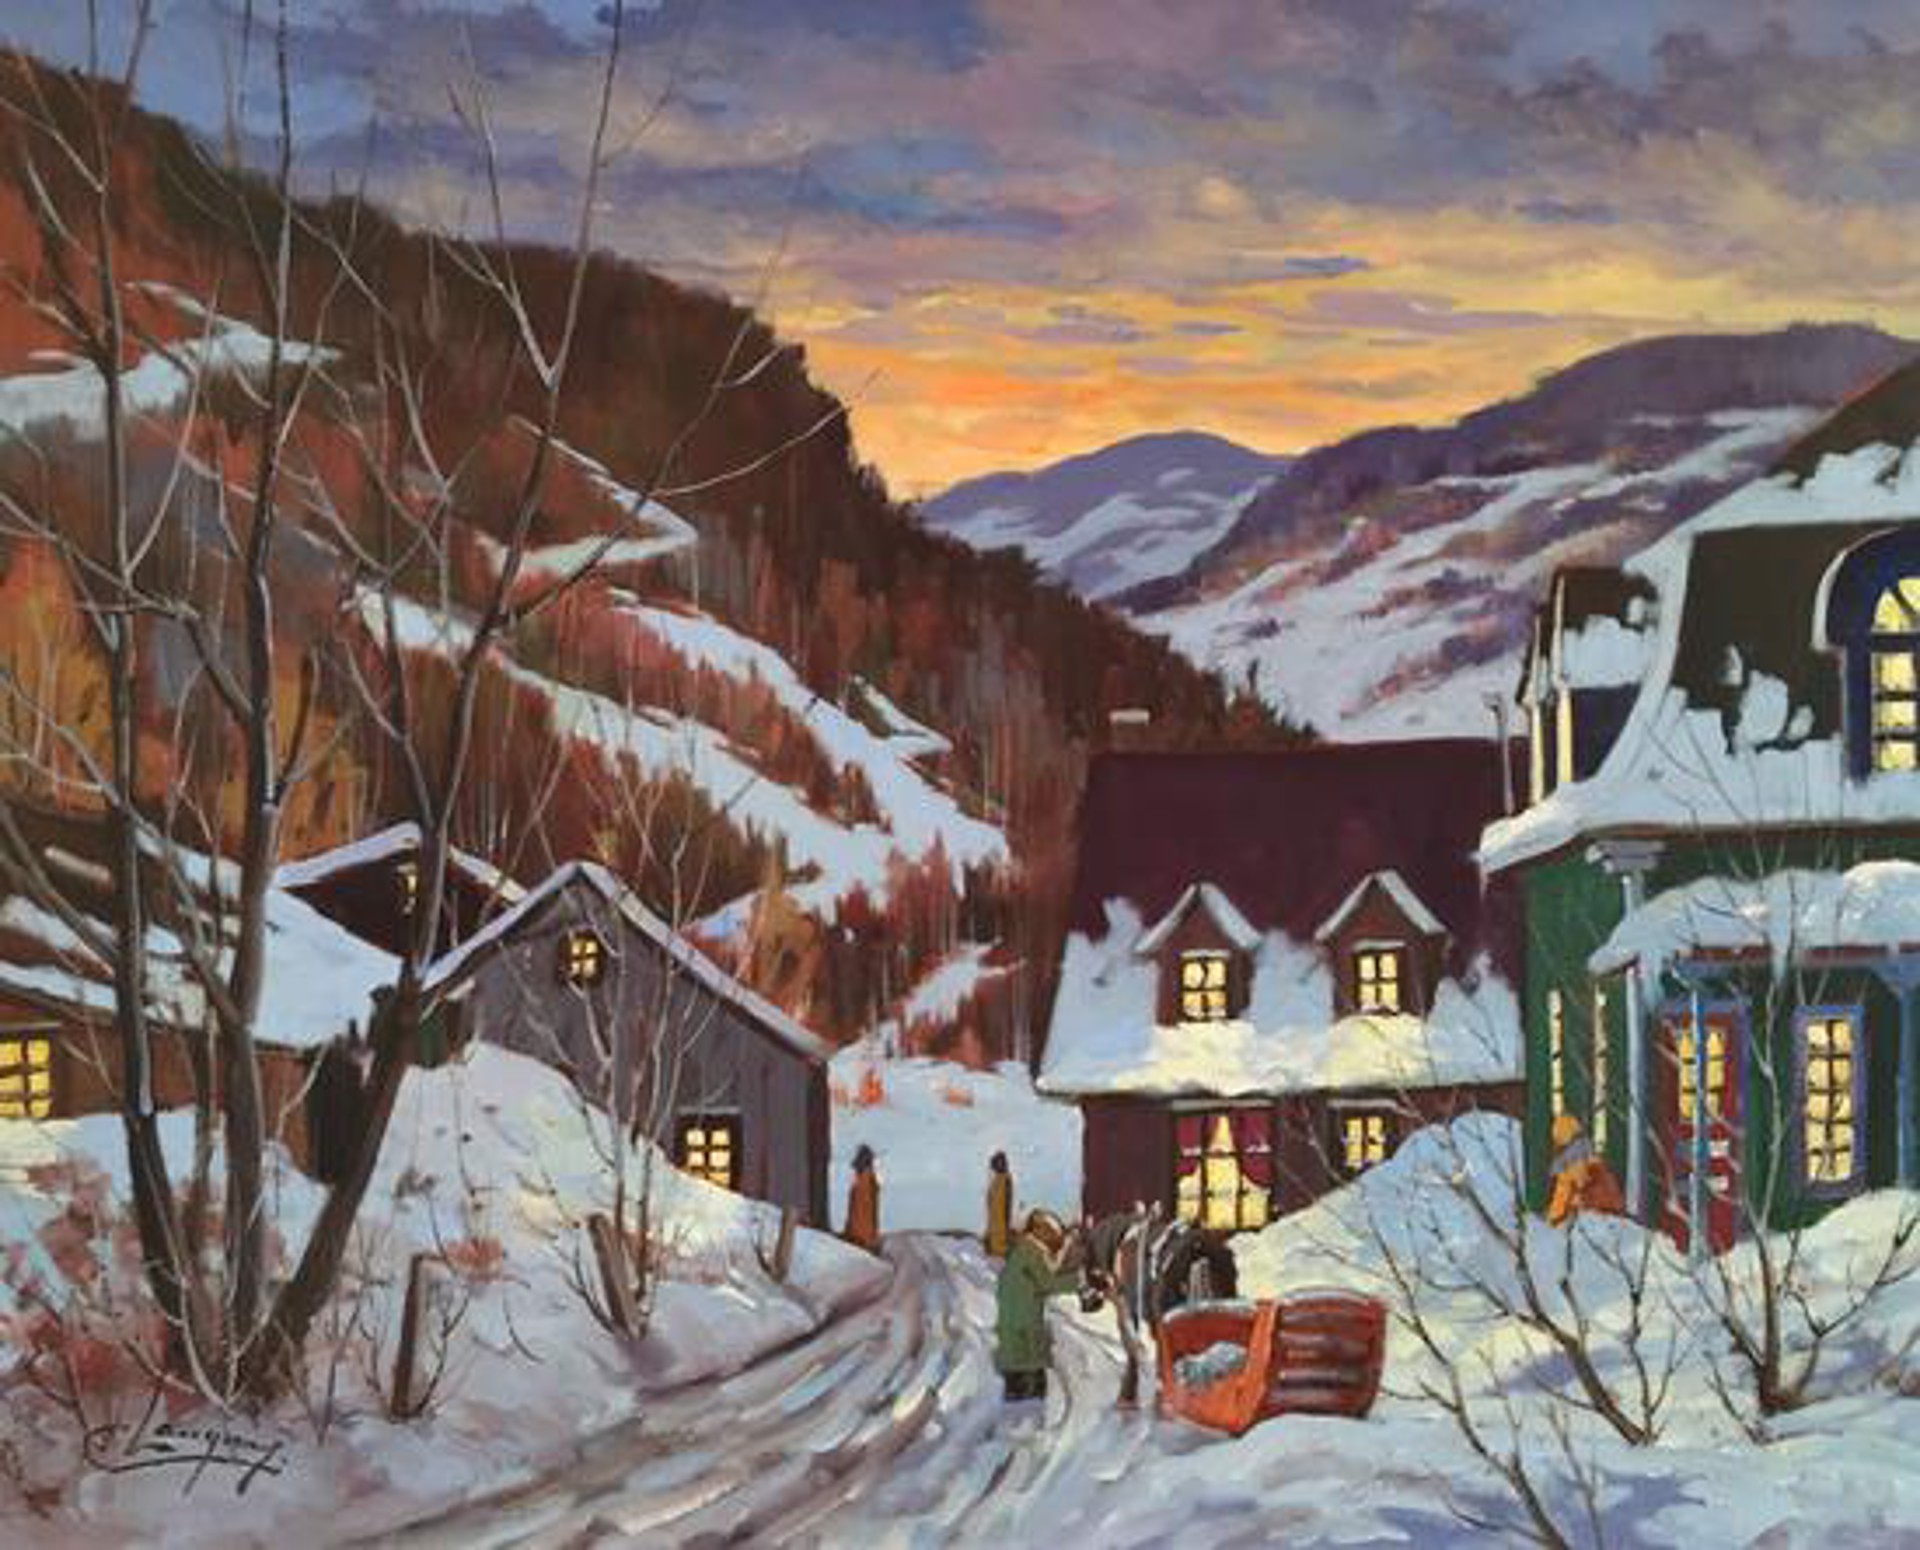 Another Day Ending by Claude Langevin (1942-)